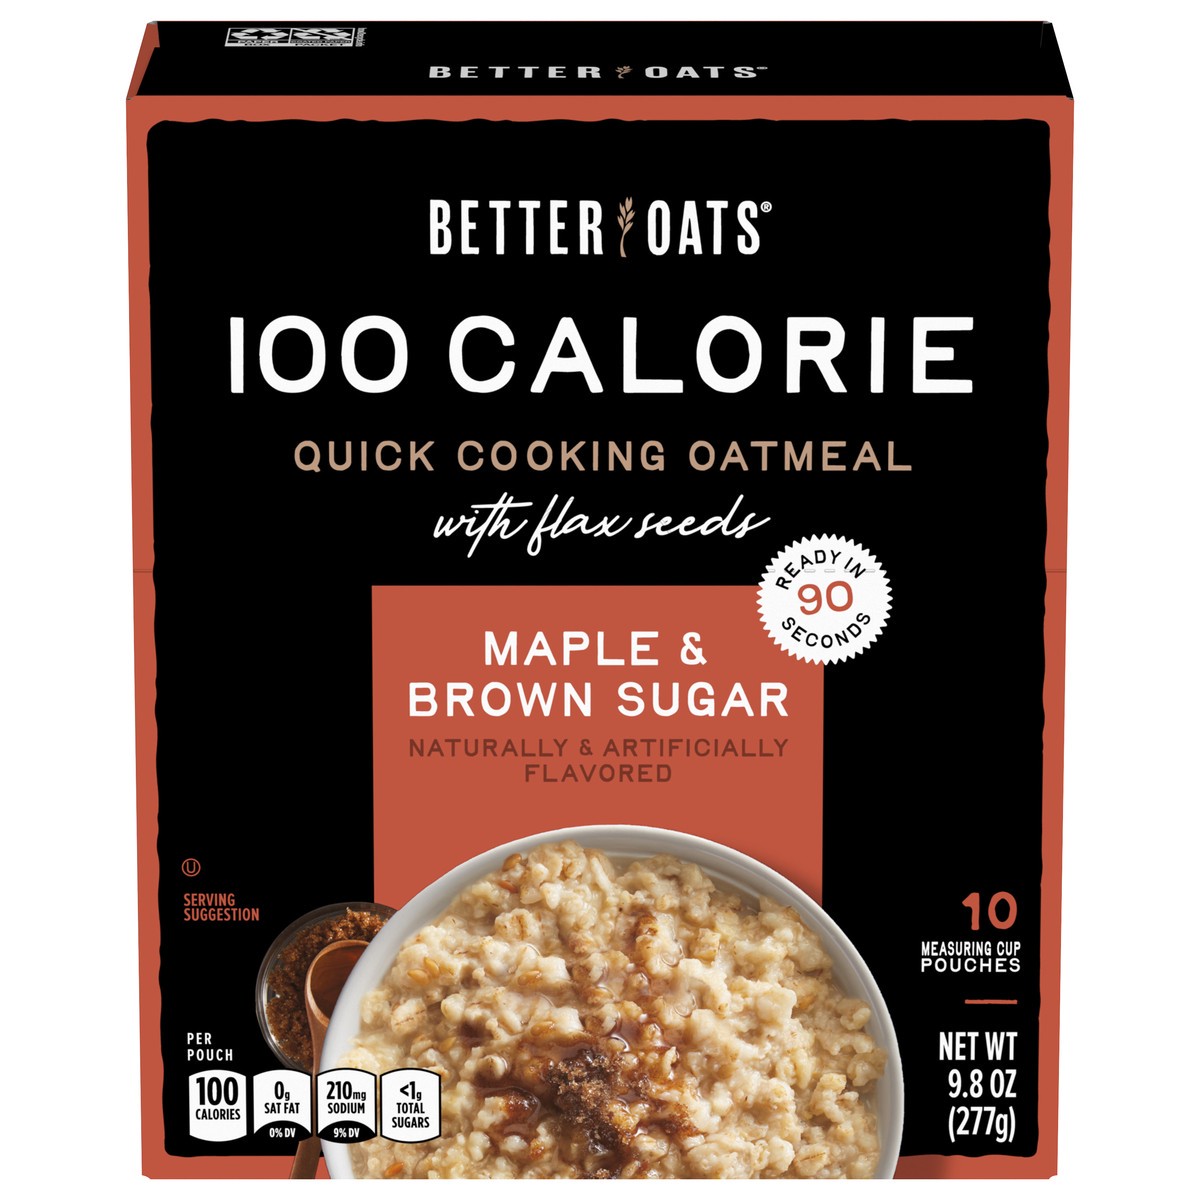 slide 1 of 5, Better Oats 100 Calorie Maple and Brown Sugar Oatmeal with Flax Seeds, 10 Instant Oatmeal Pouches, 9.8 OZ Pack, 9.8 oz